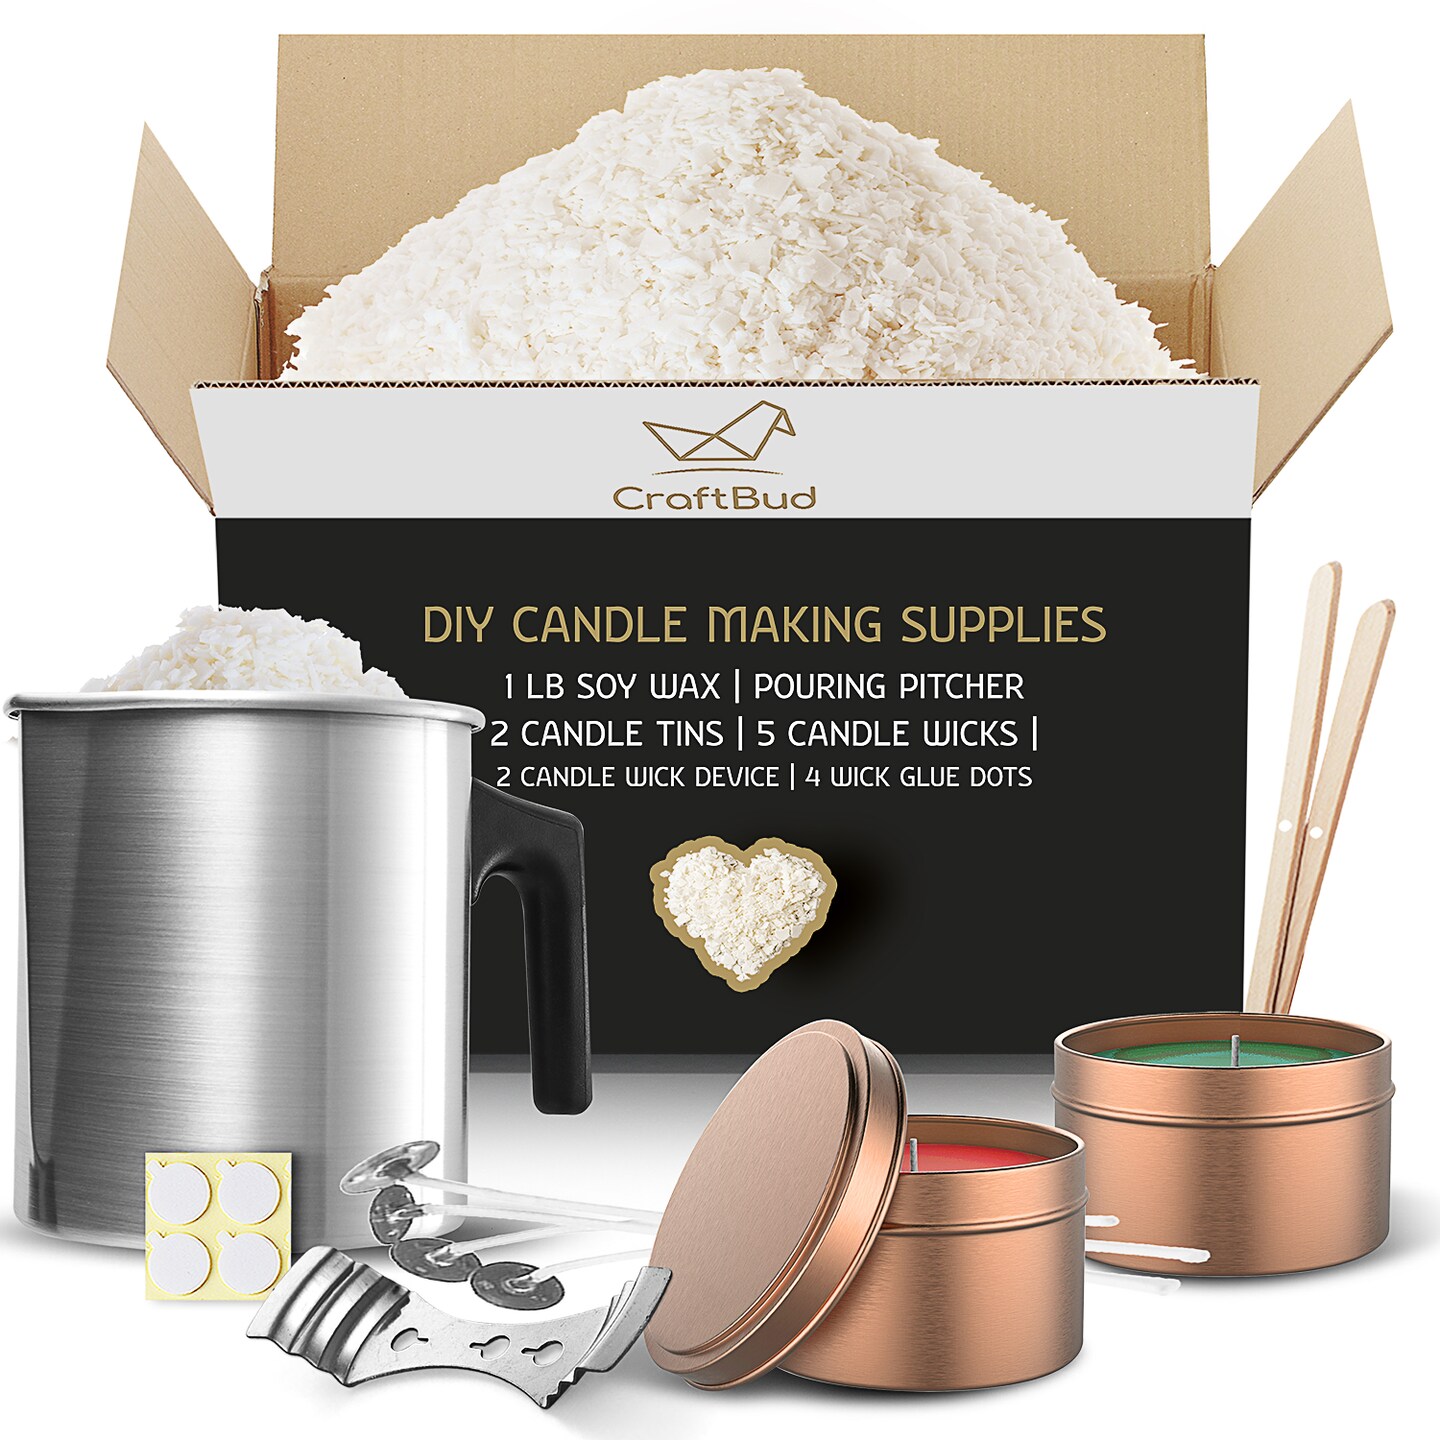 DIY Candle Making Kit for Adults and Kids, Candle Making Supplies, 12 Lbs.  Soy Candle Wax Flakes, Complete Soy Candle Kit Making, Premium Candle Making  Set